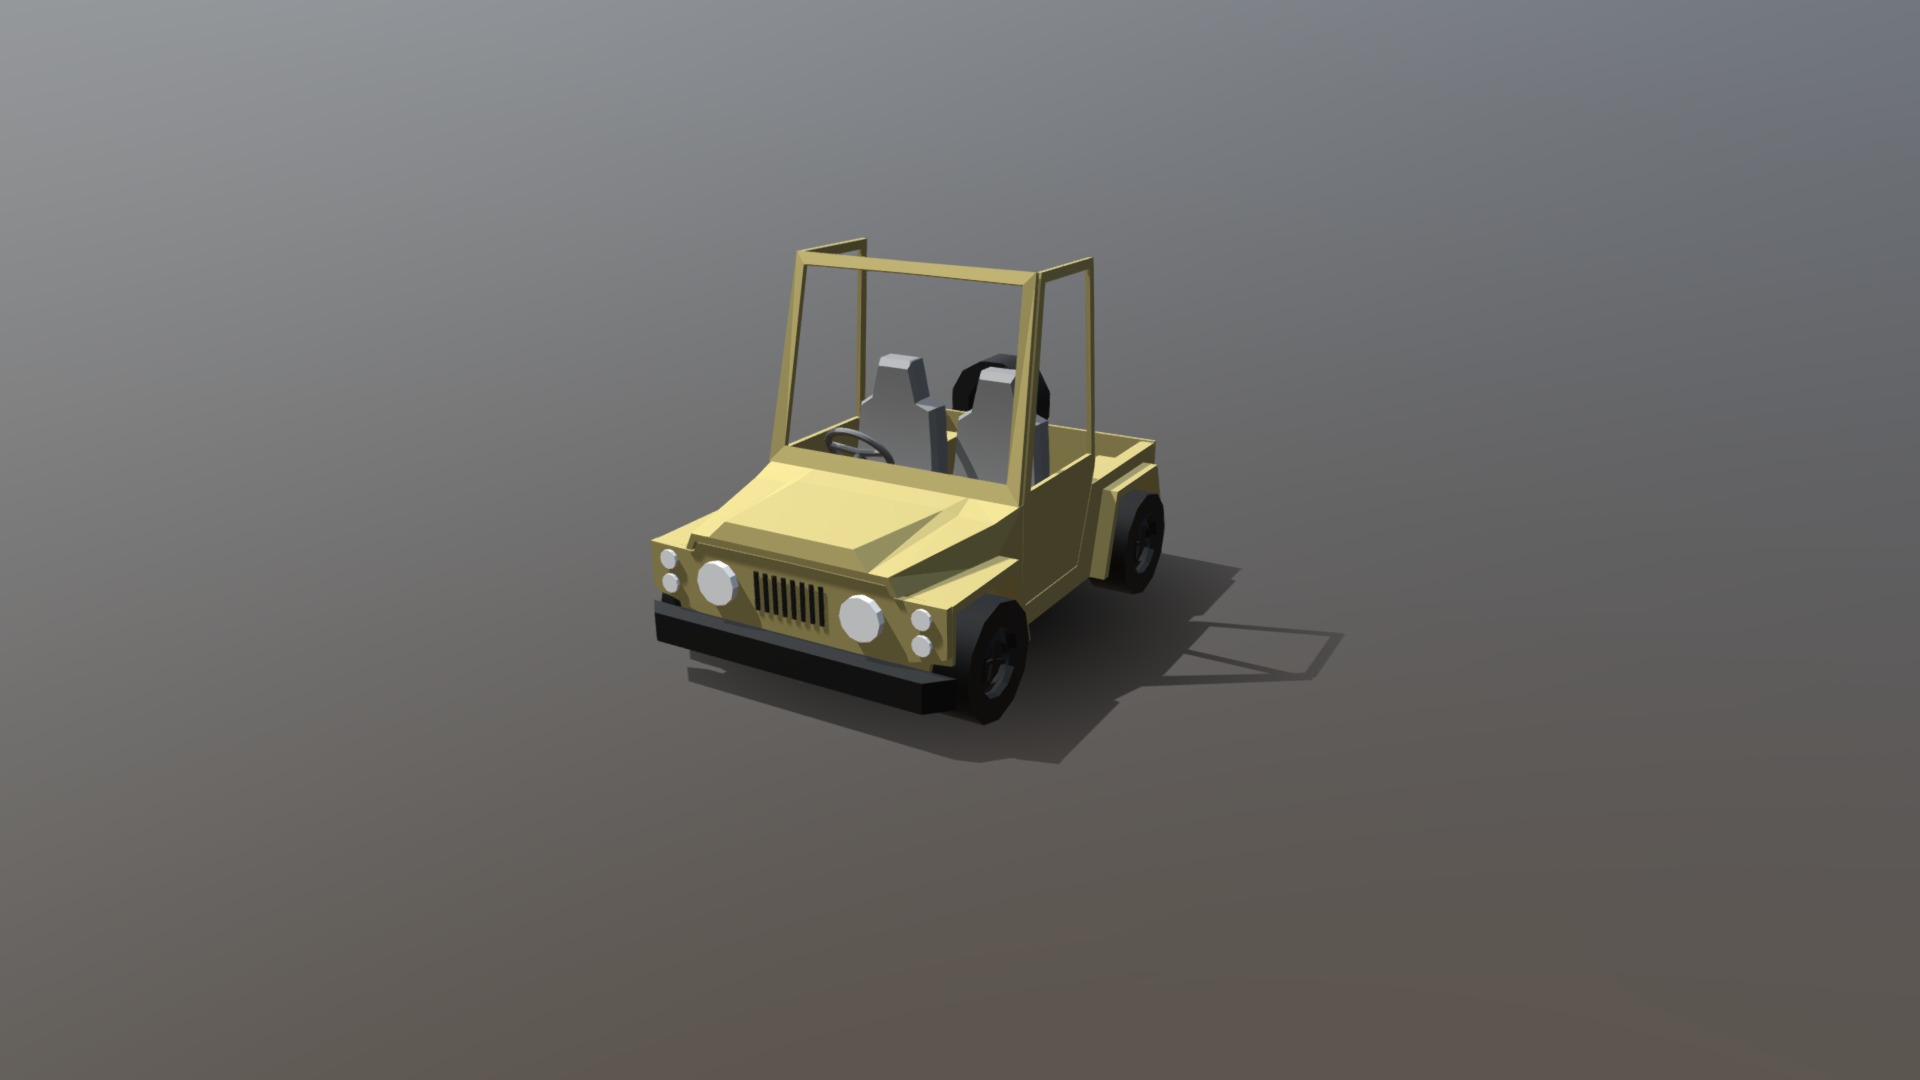 3D model Low Poly Car 002 - This is a 3D model of the Low Poly Car 002. The 3D model is about a small yellow car.